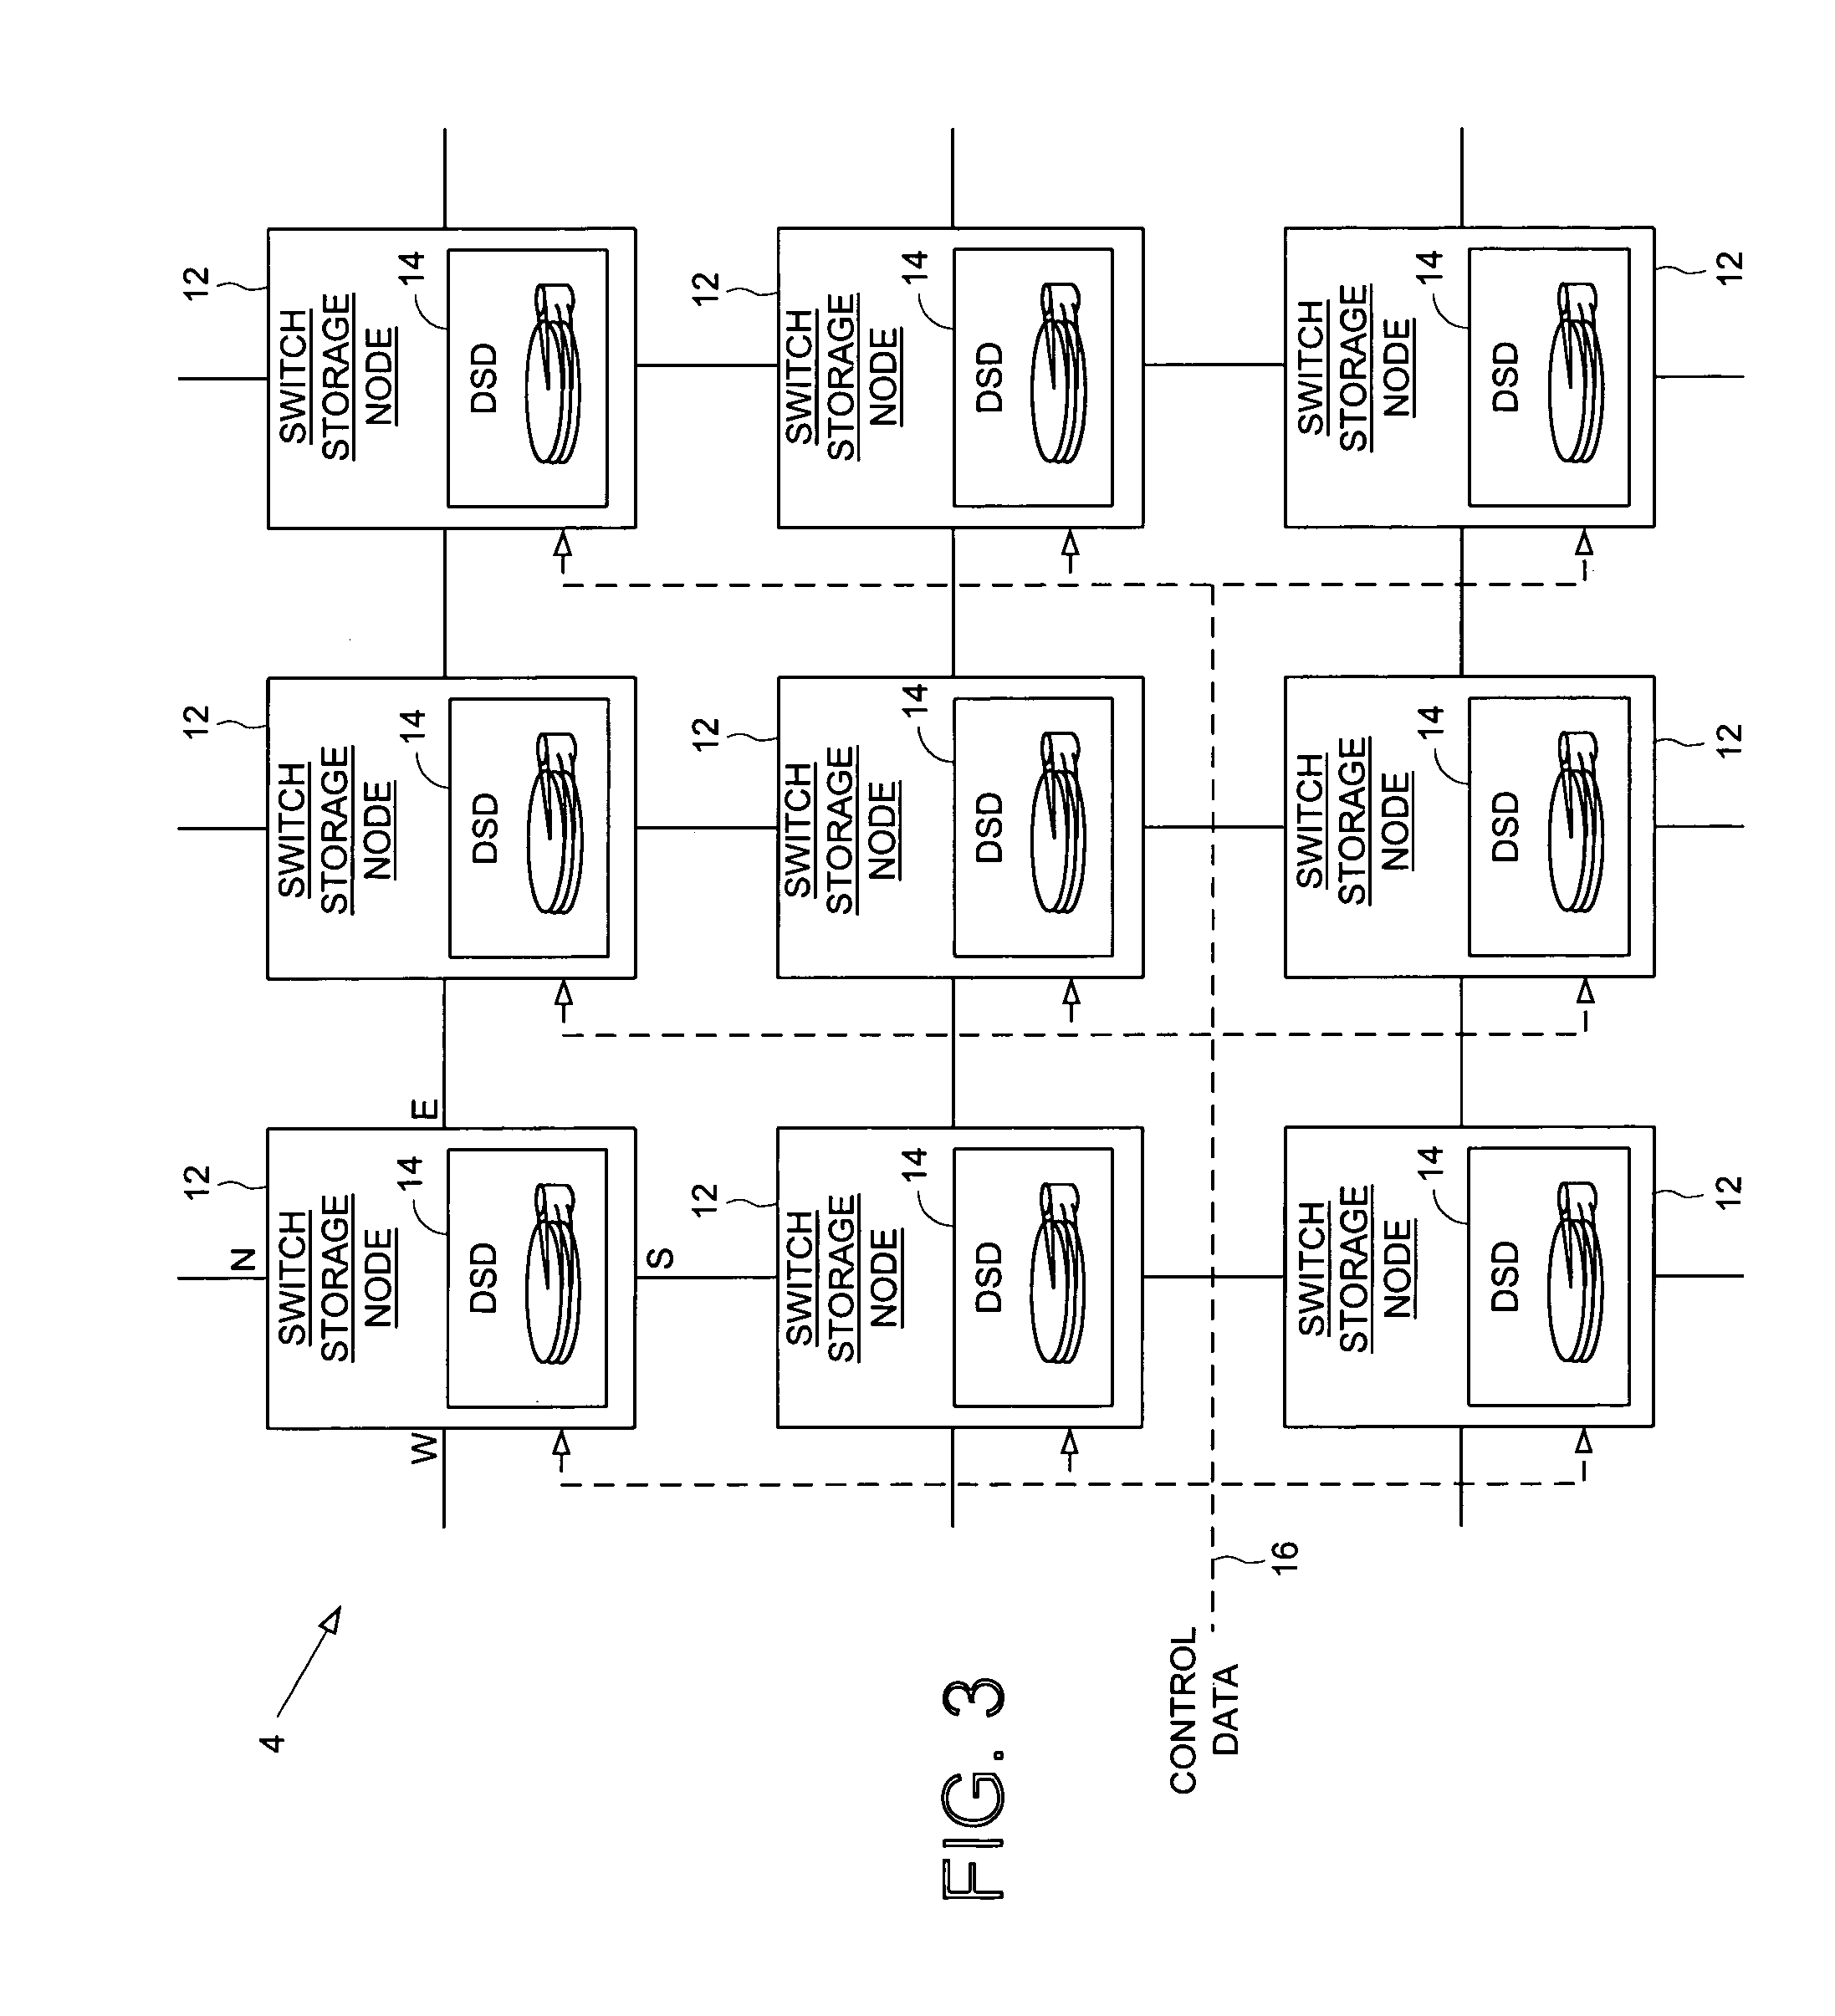 Transferring scheduling data from a plurality of disk storage devices to a network switch before transferring data associated with scheduled requests between the network switch and a plurality of host initiators